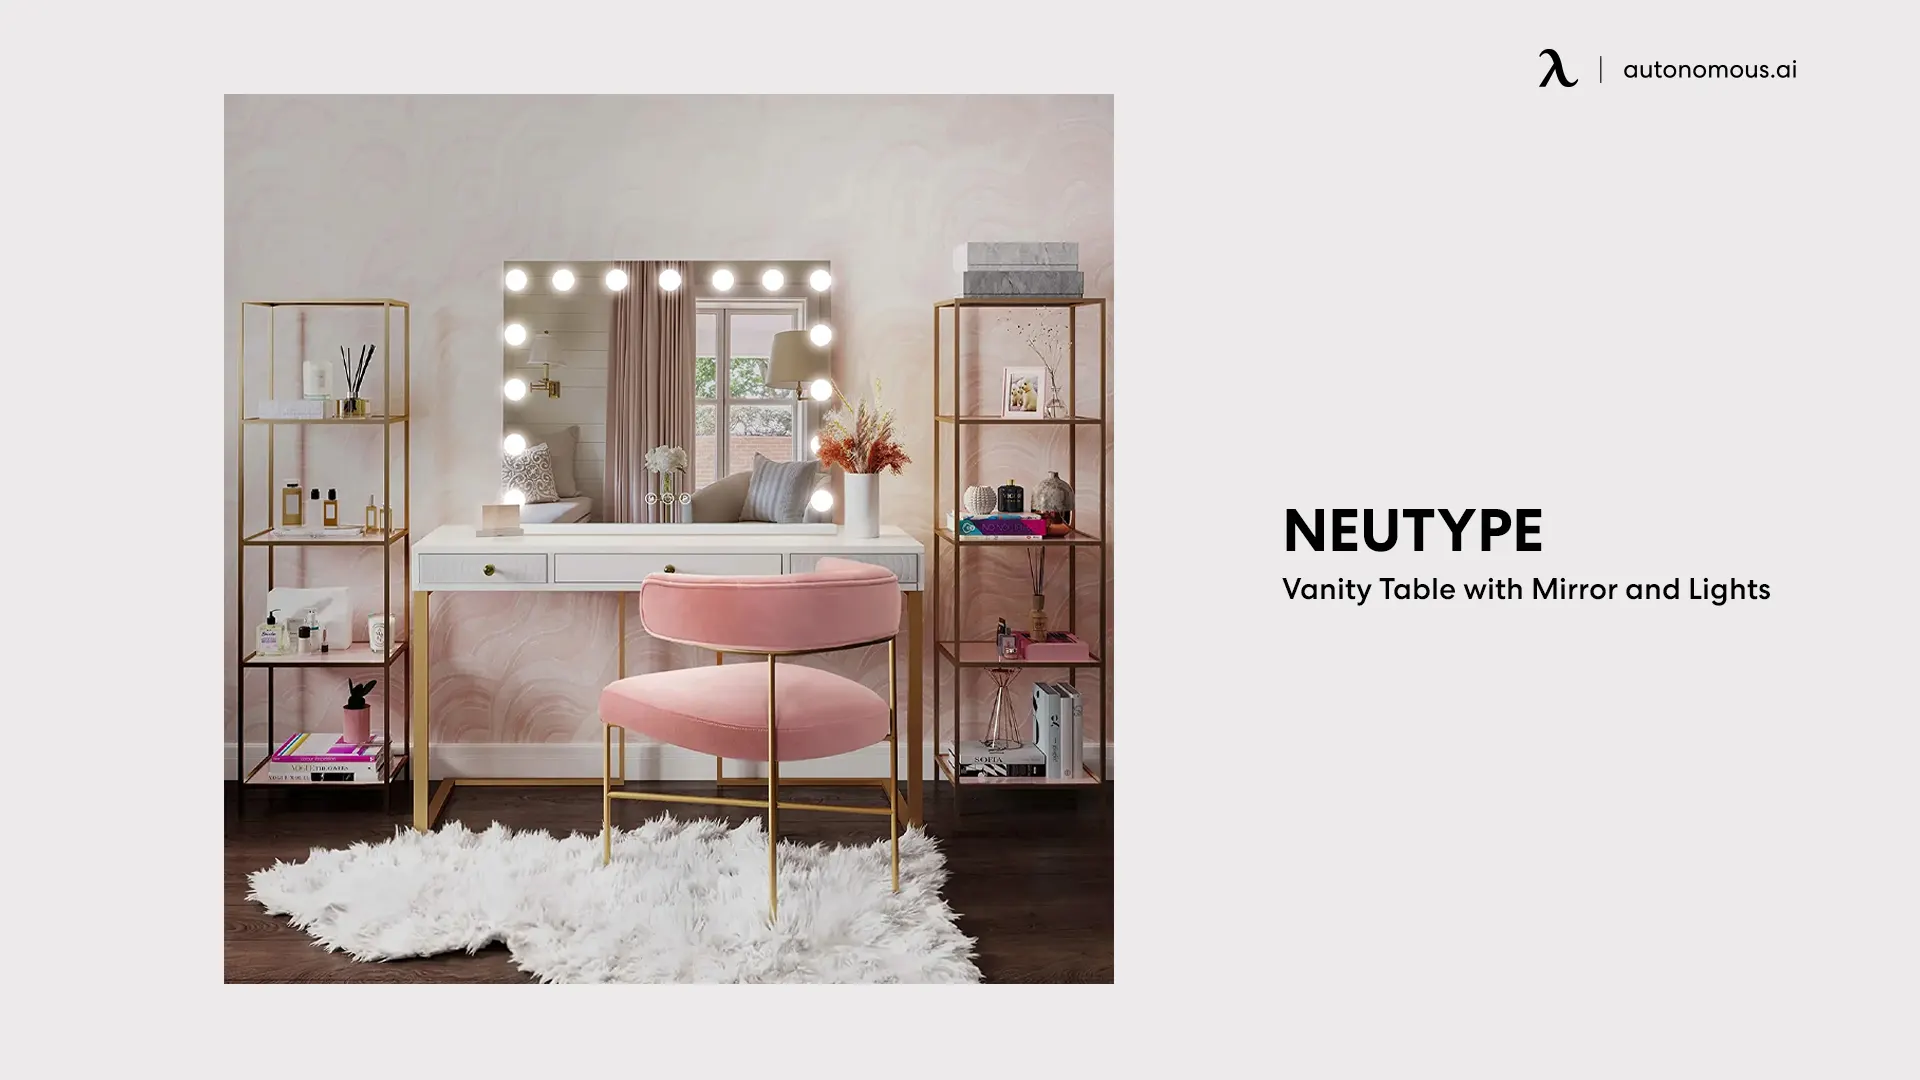 NeuType vanity makeup table with Mirror and Lights